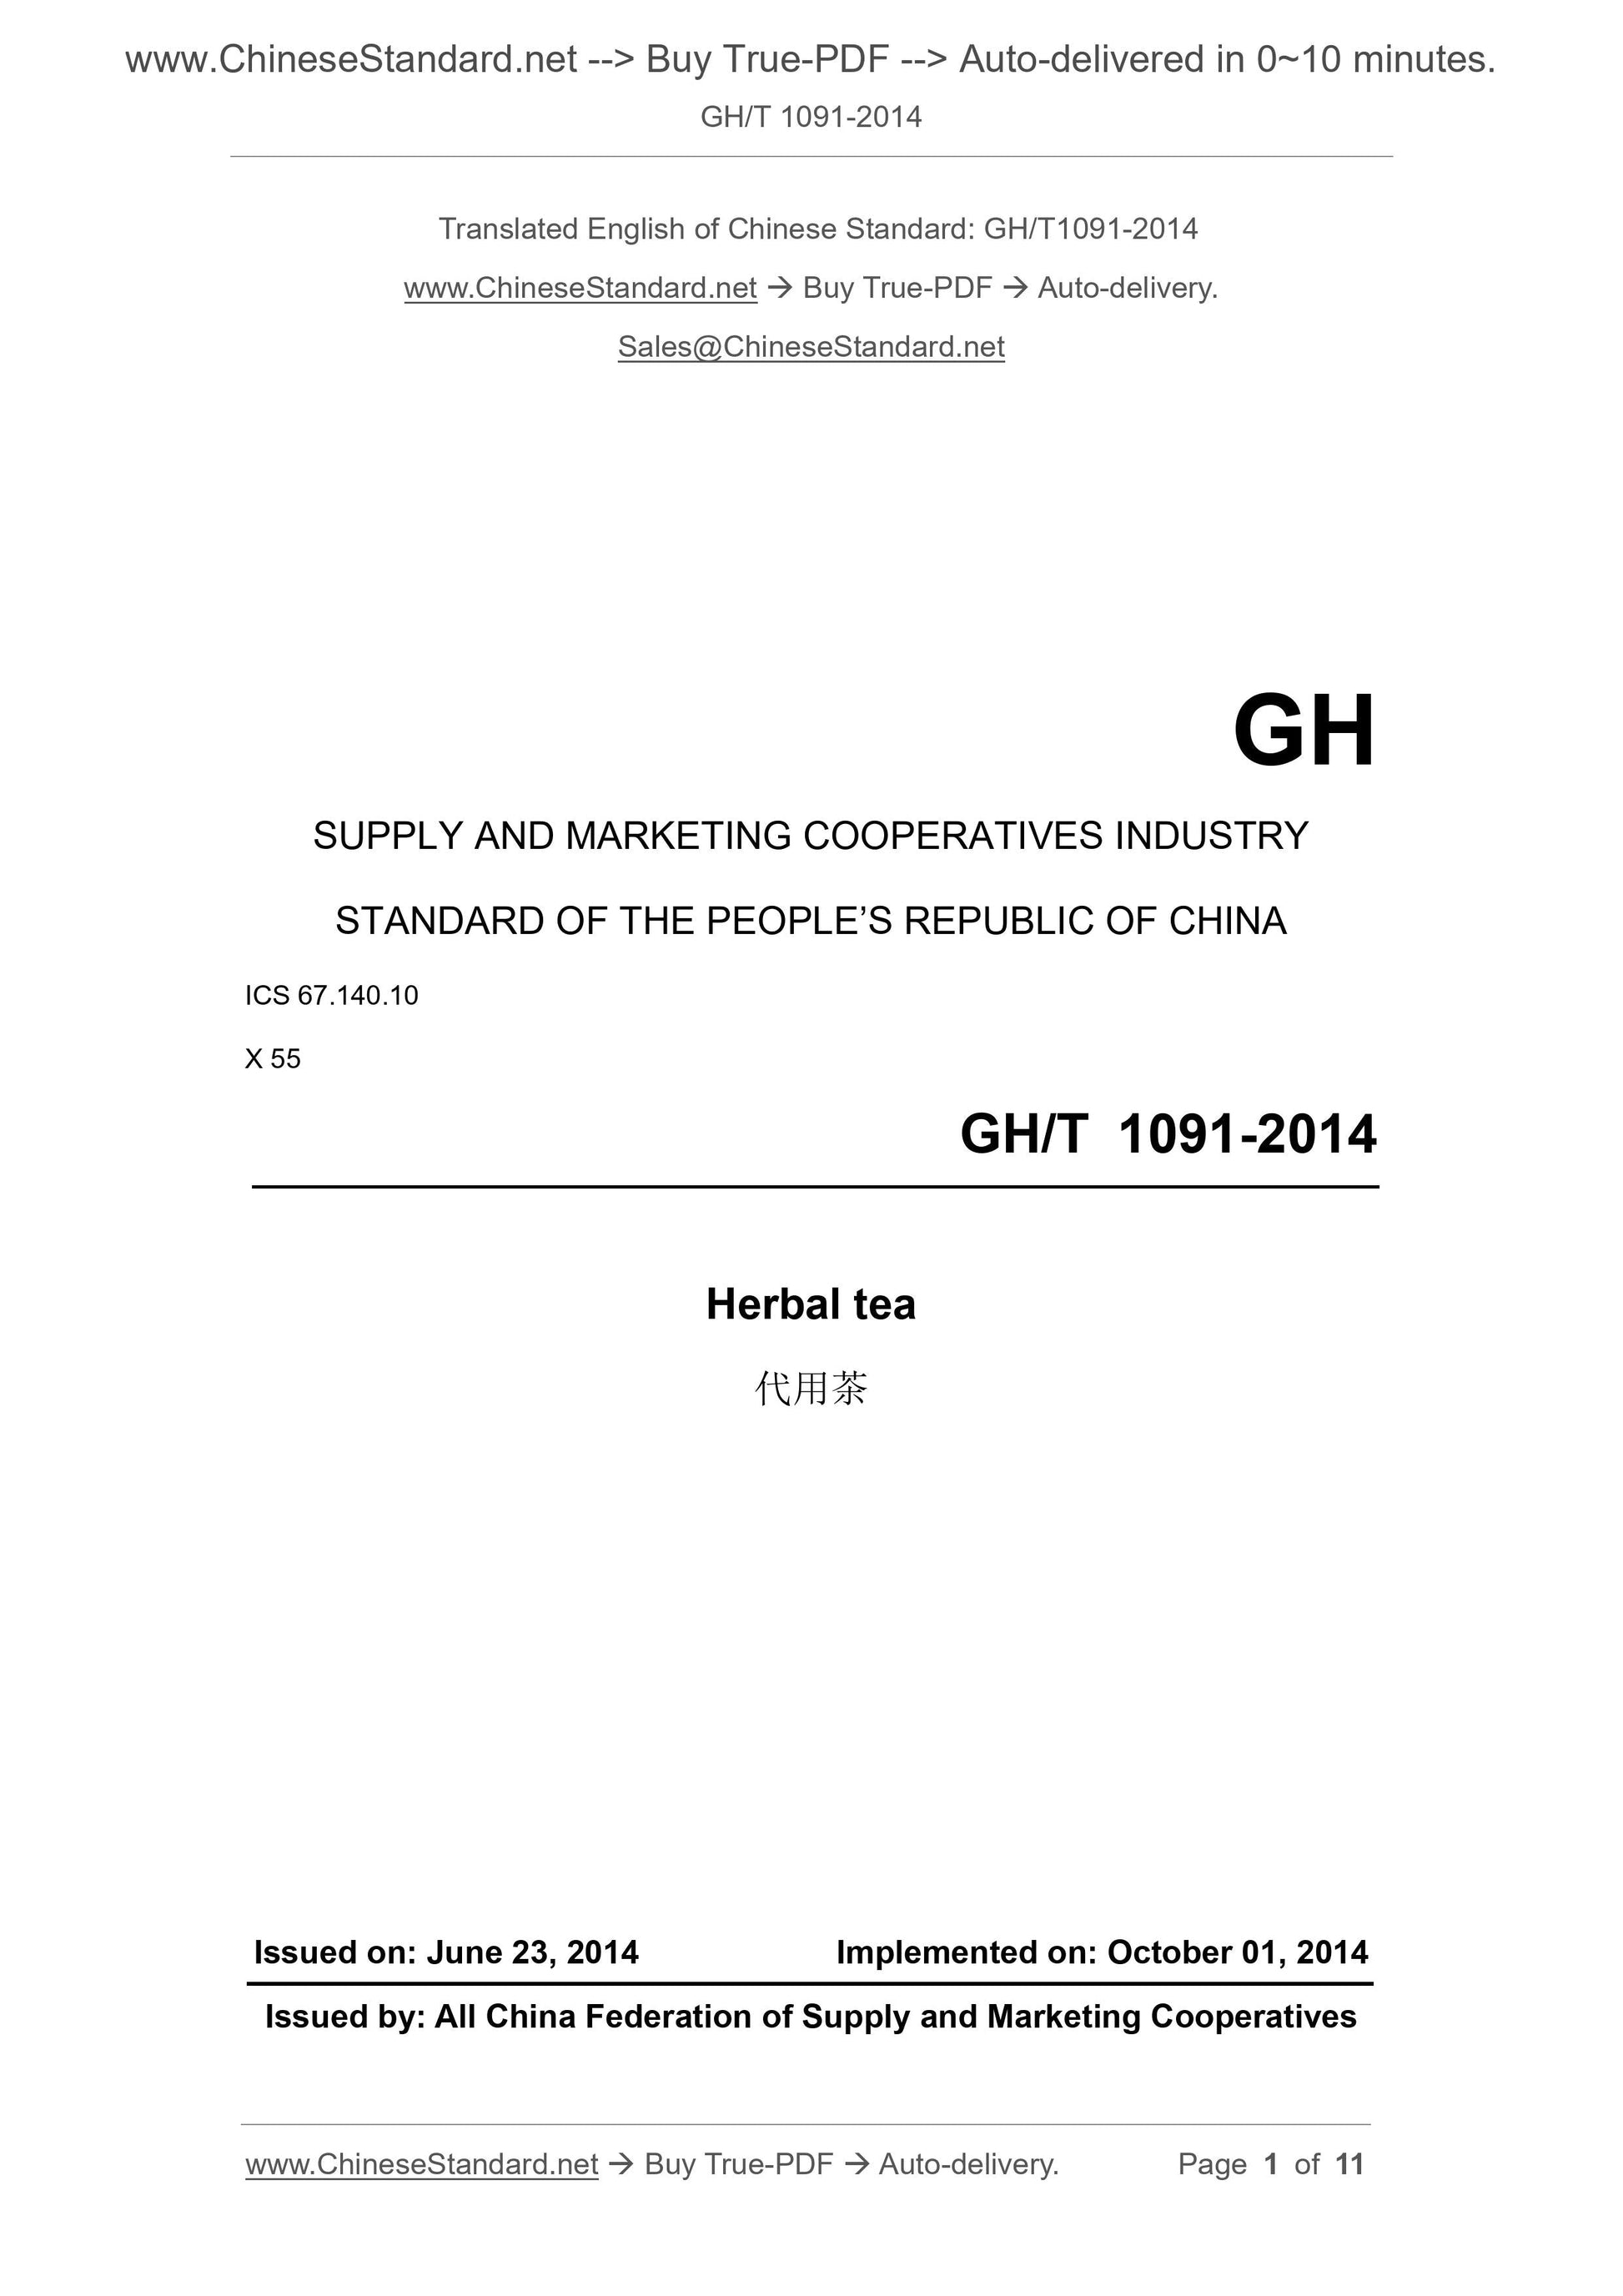 GH/T 1091-2014 Page 1